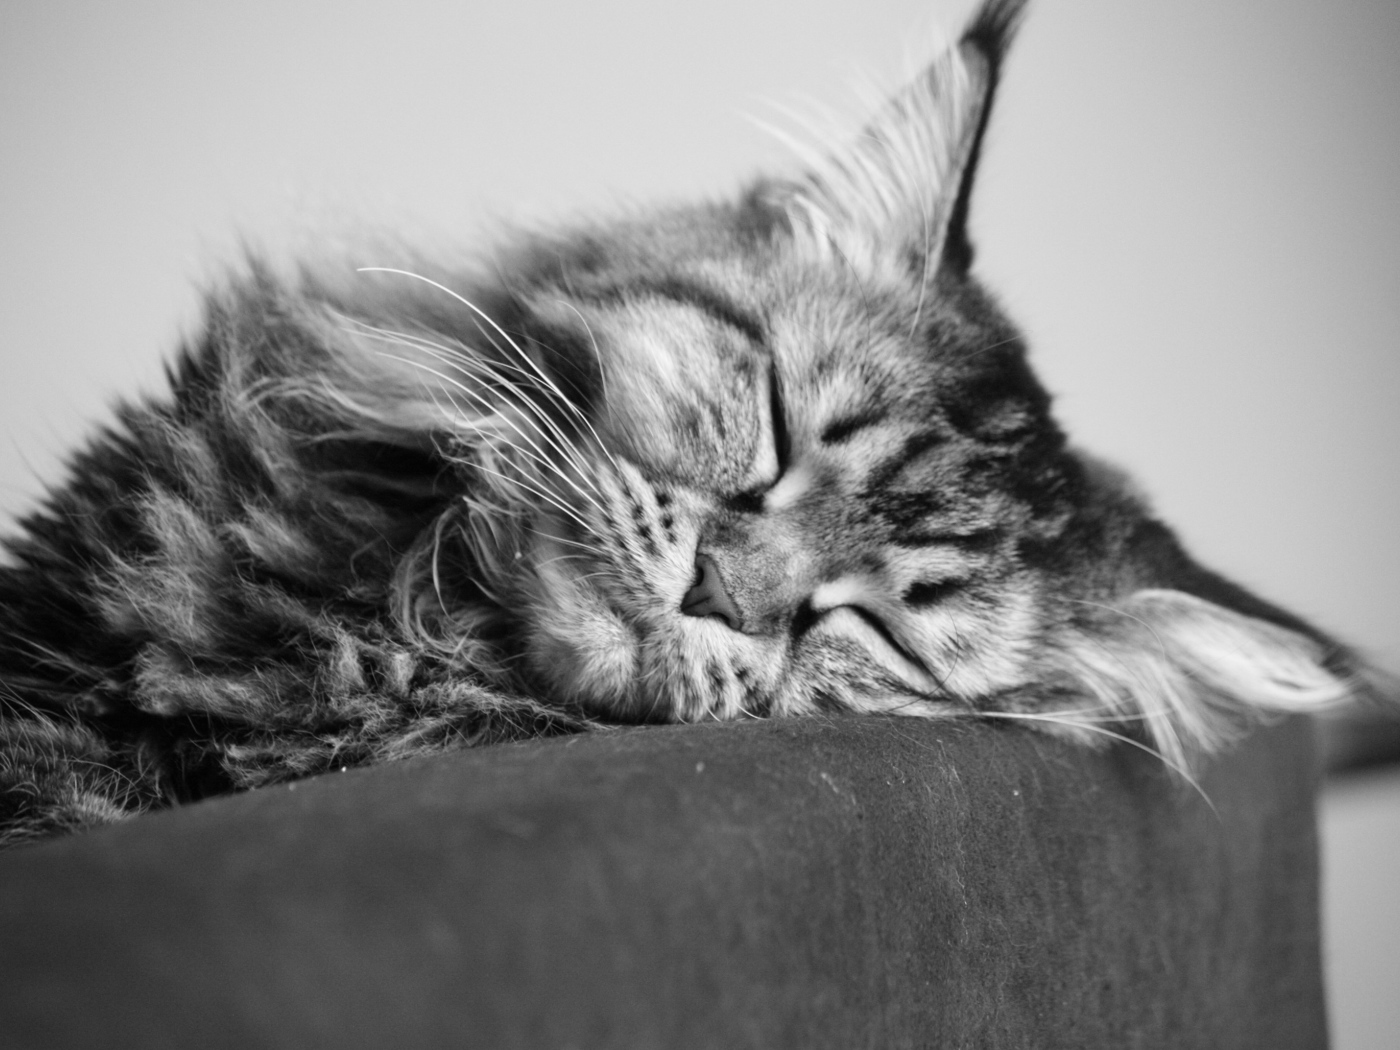 A young Maine Coon cat sleeping, black-and-white photo